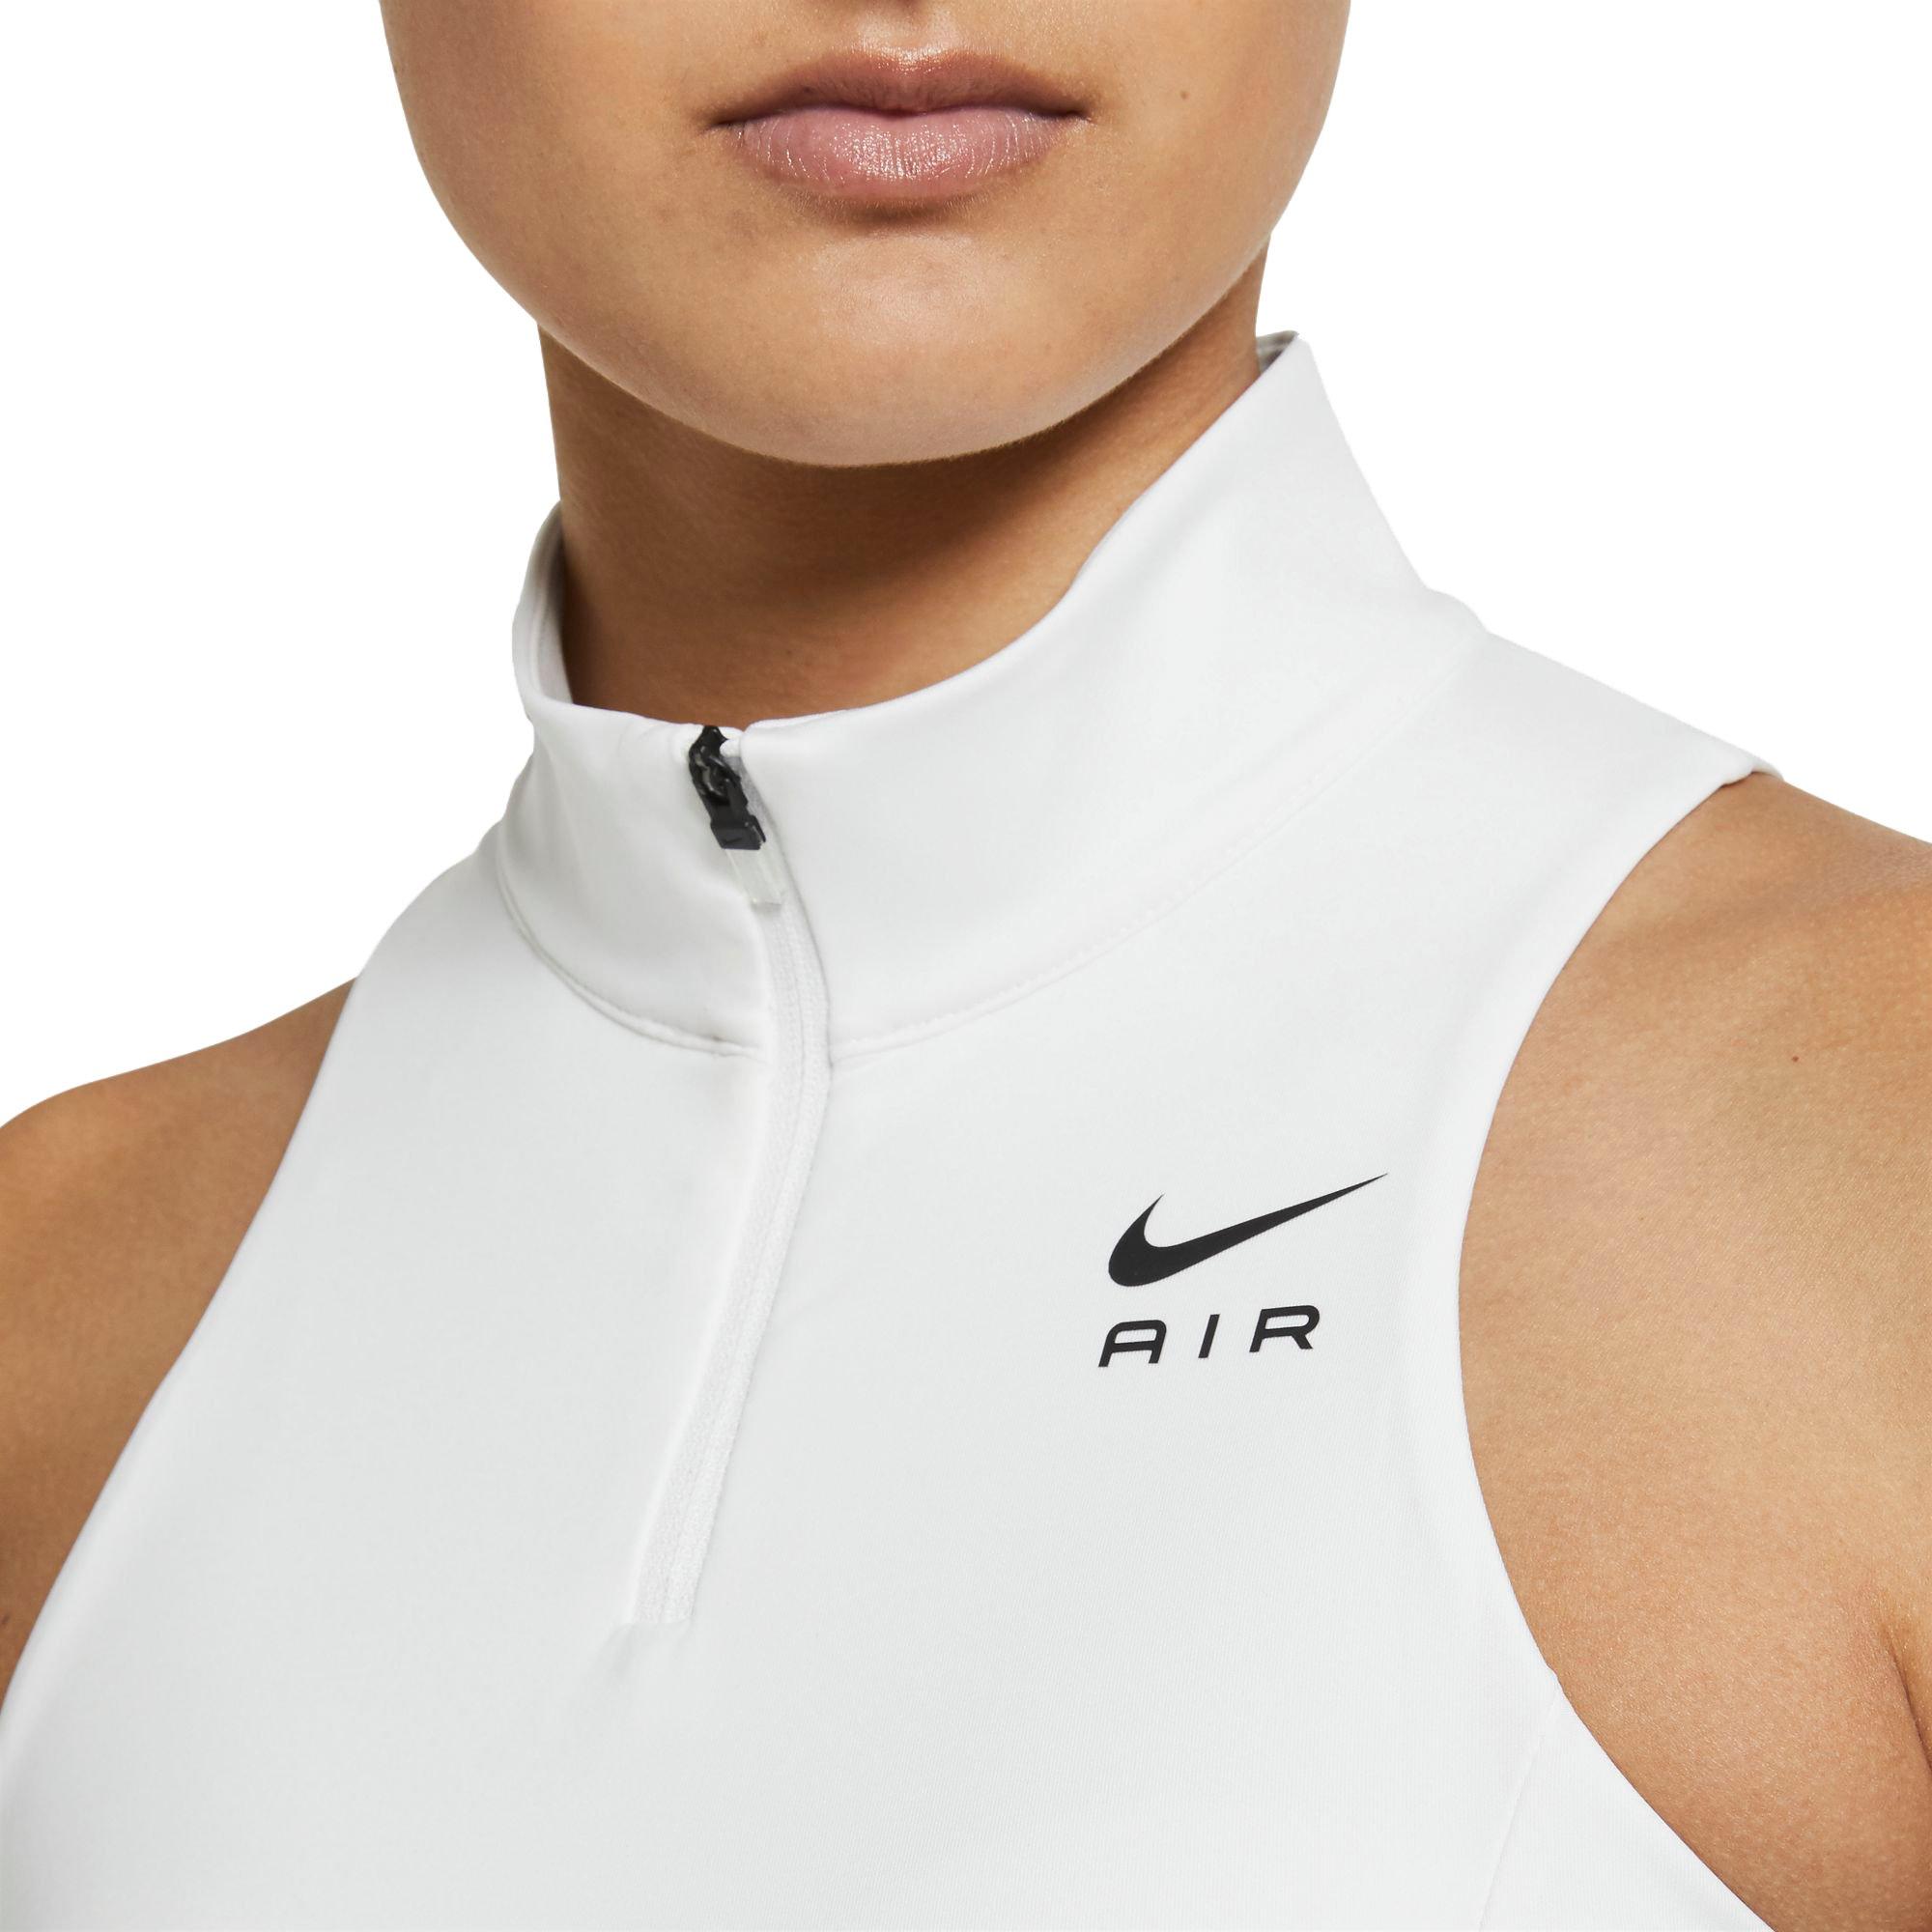 Nike Air Dri-FIT Swoosh Mock Zip Bra Black Size XS - $28 (46% Off Retail)  New With Tags - From Eugenie